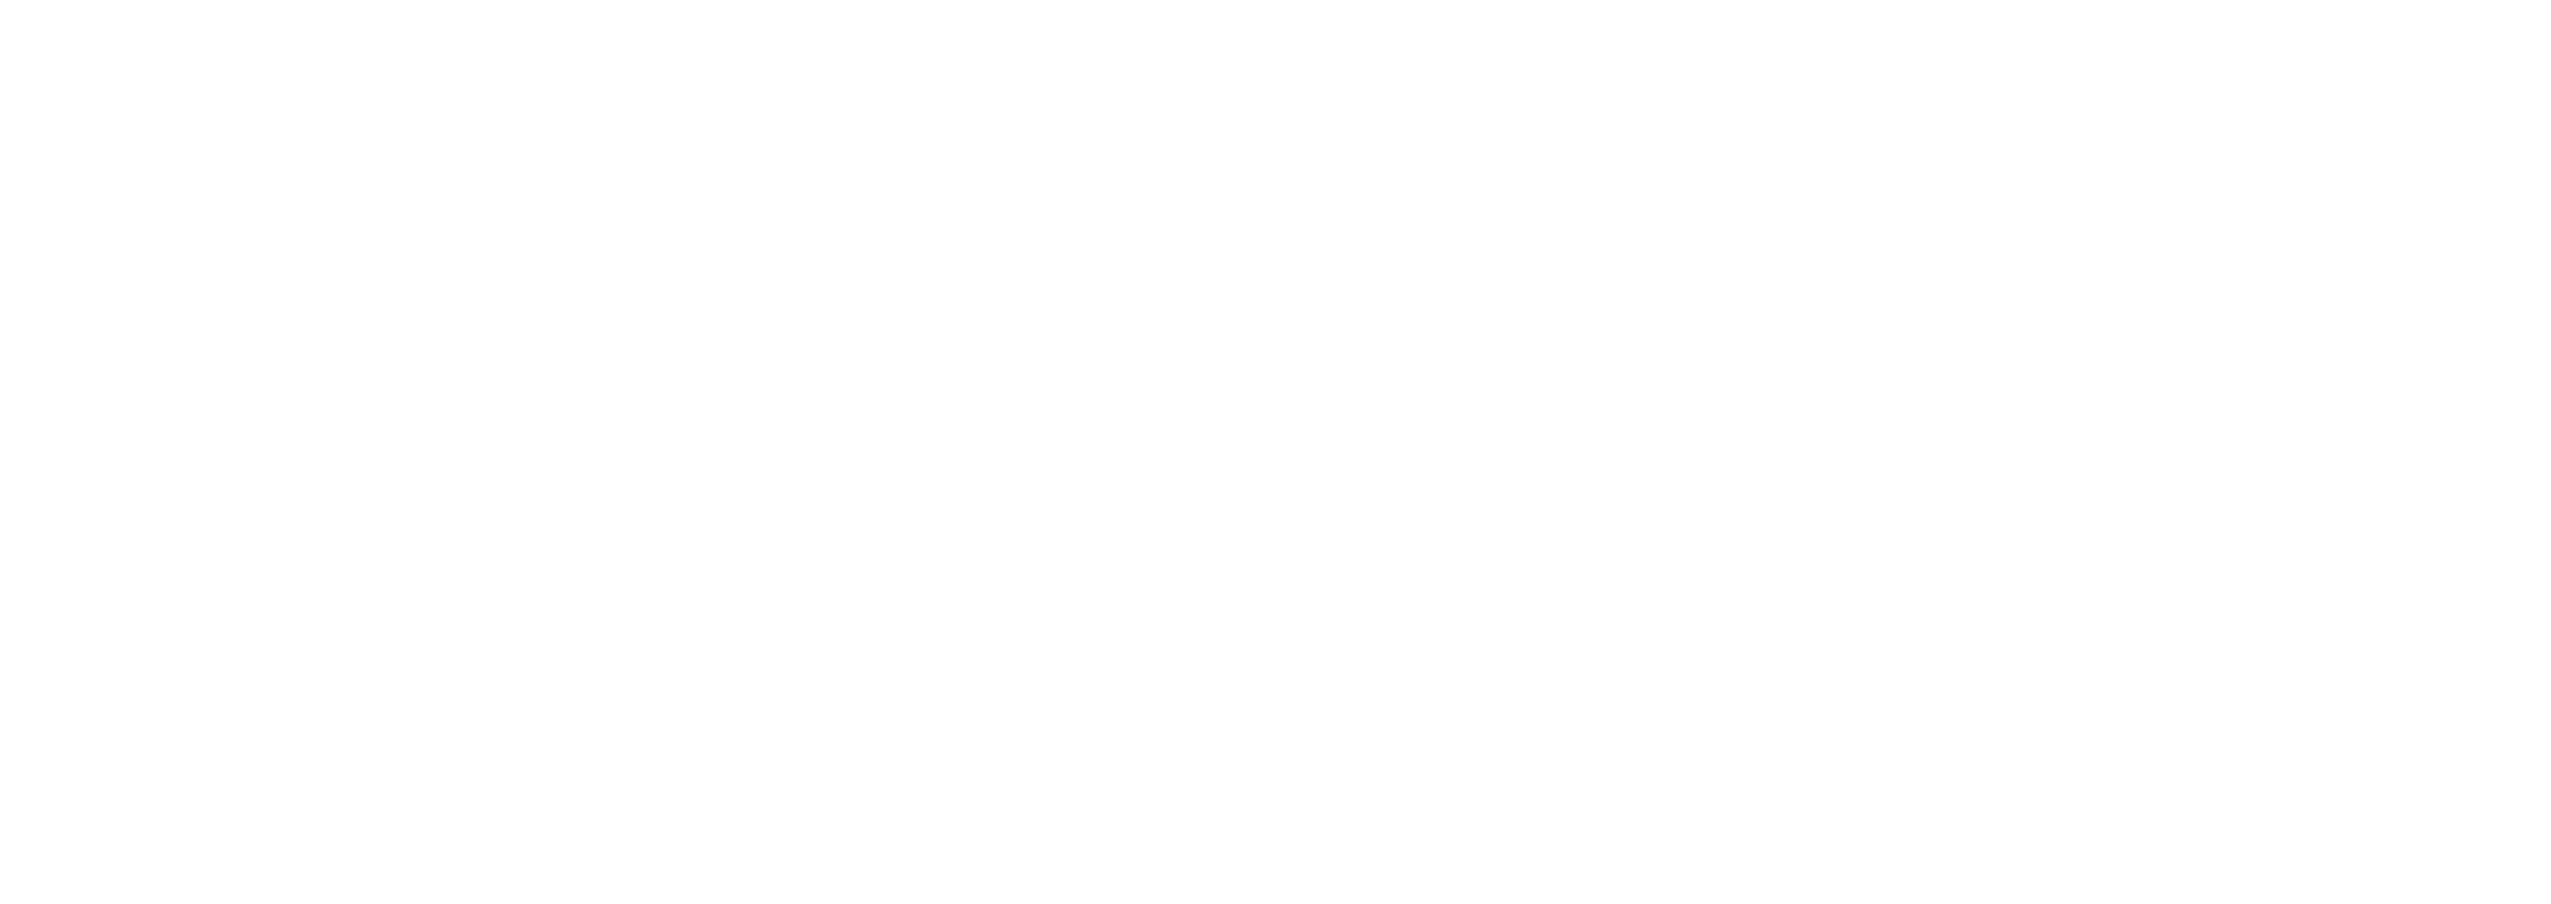 Panther Capital Group Logo White